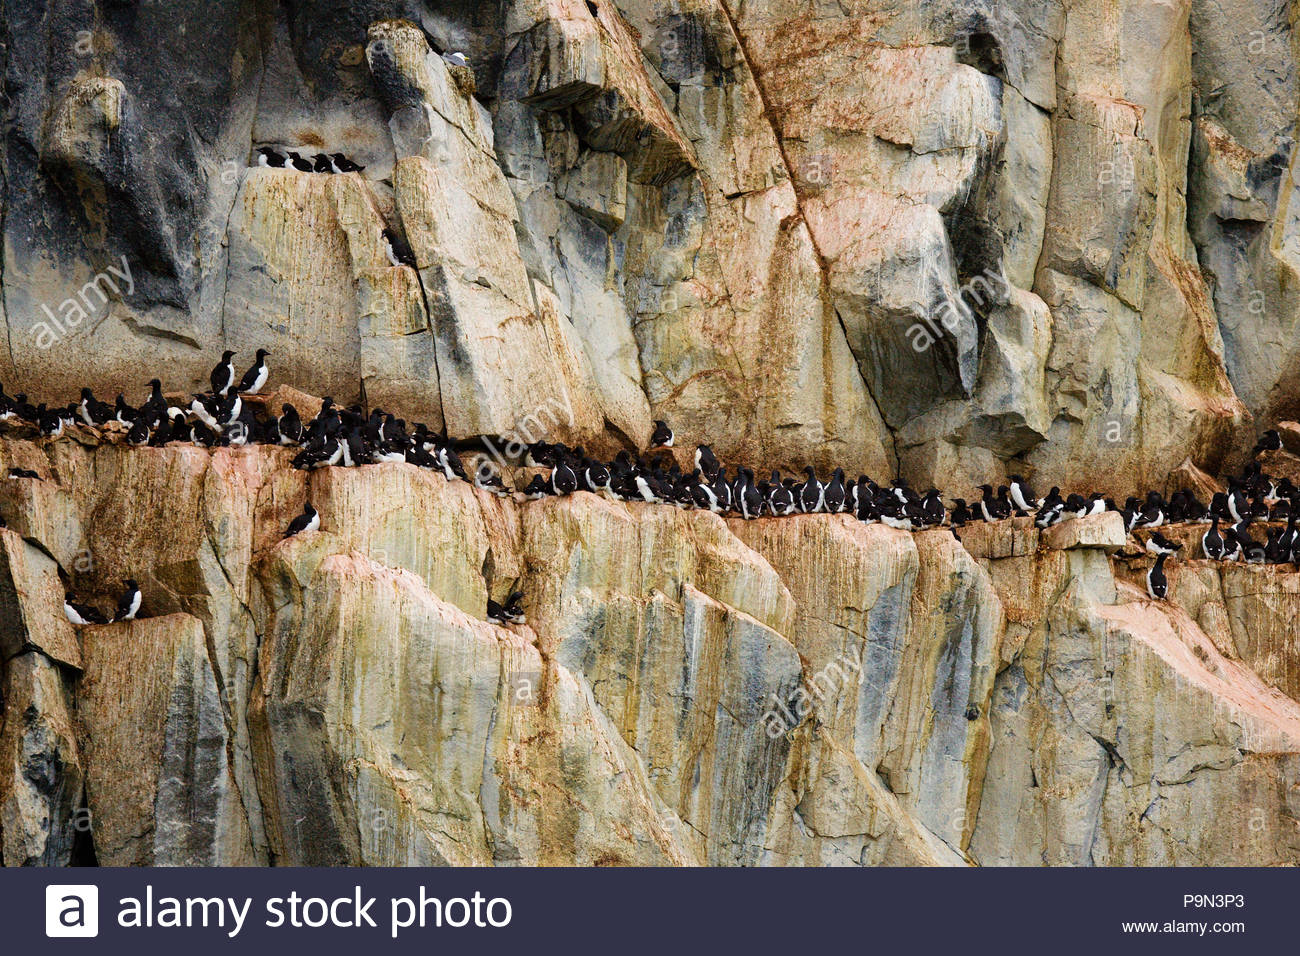 Brunnich's guillemots/thick-billed murres at a cliff-side colony. Stock Photo